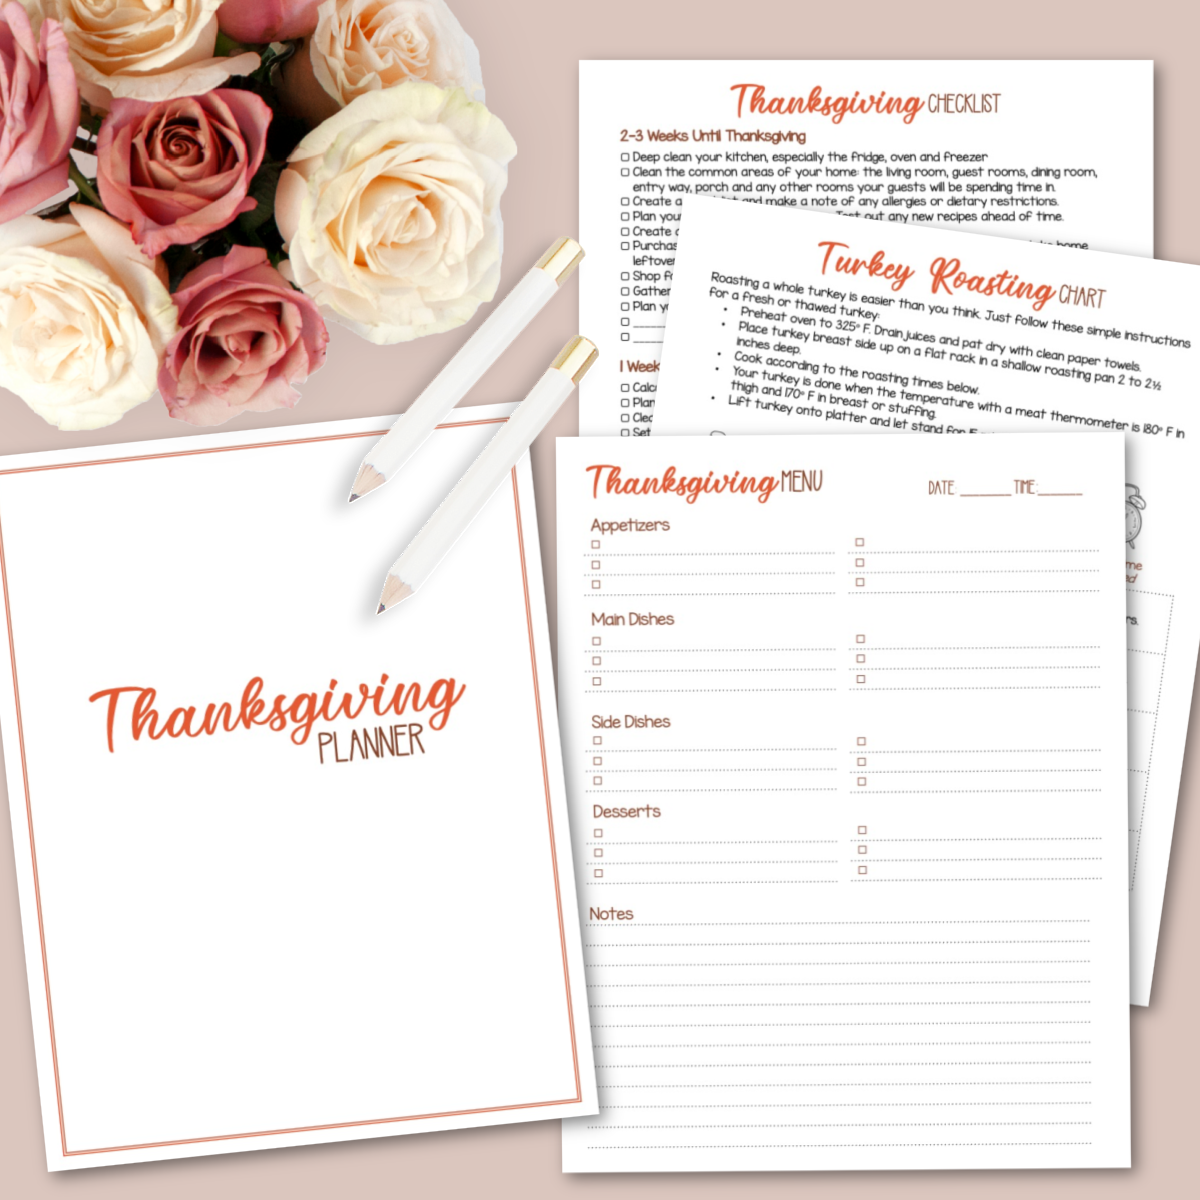 Thanksgiving Planner Main Image.png